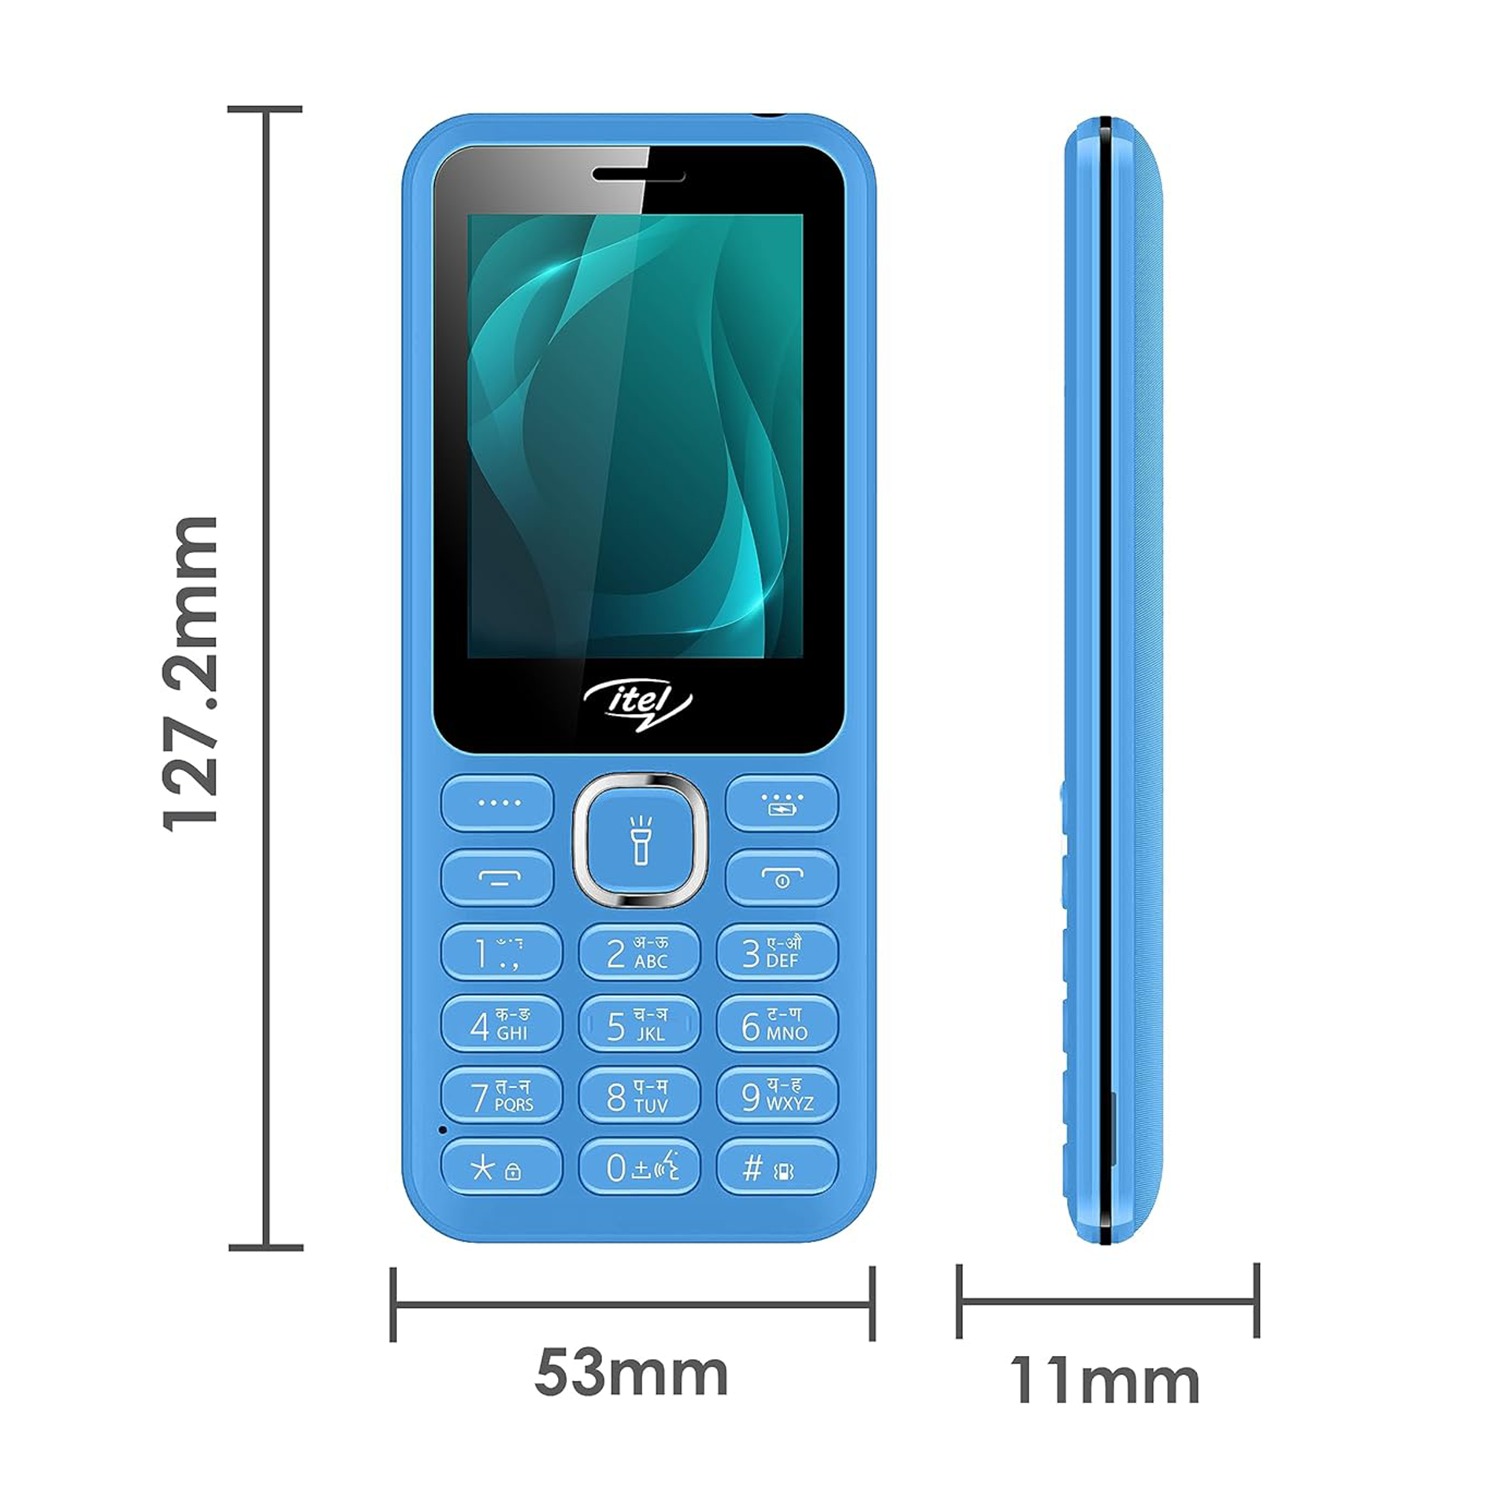 itel it5027 Keypad Mobile Phone with 2.4 inch Display Size |11mm Slim Body| 1200 mAh Battery| King Voice (Blue) - Blue